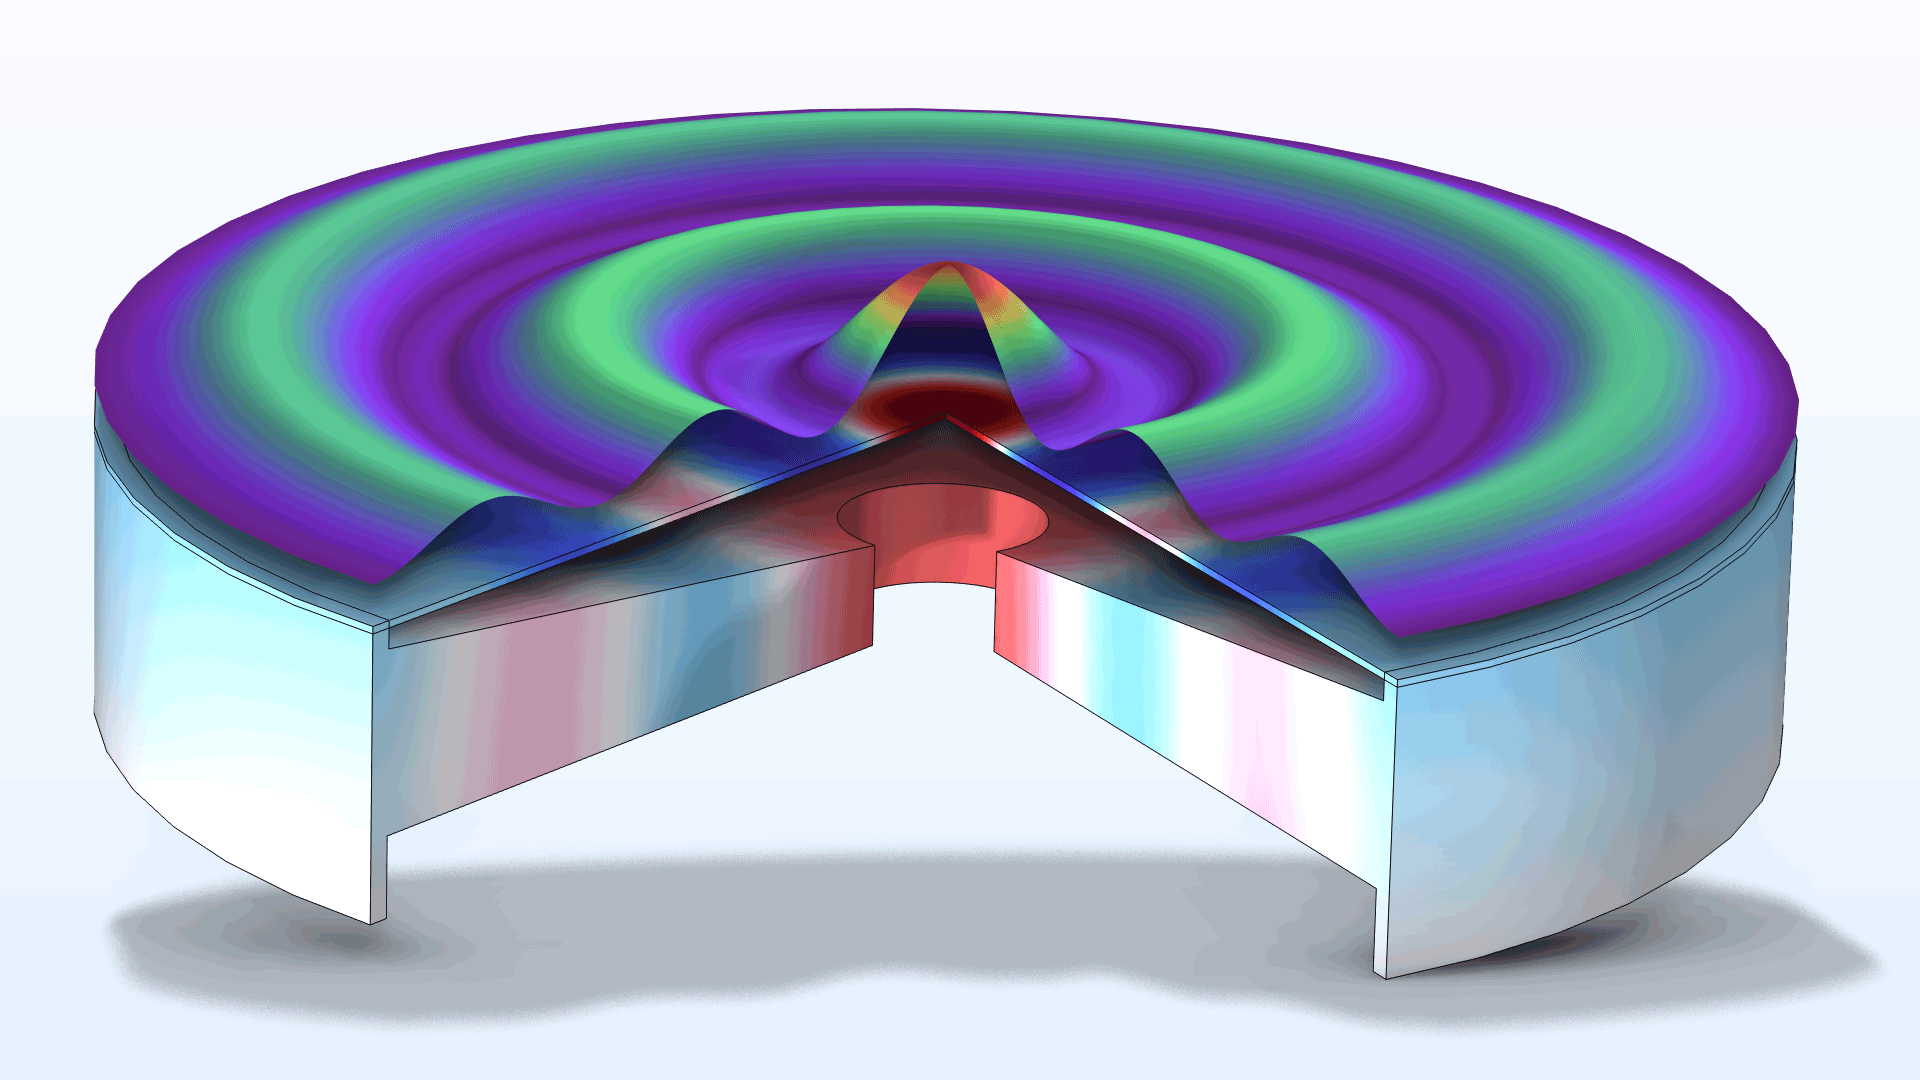 A condenser microphone model showing the mechanical deformation of the diaphragm in the Wave and Aurora Borealis color tables.